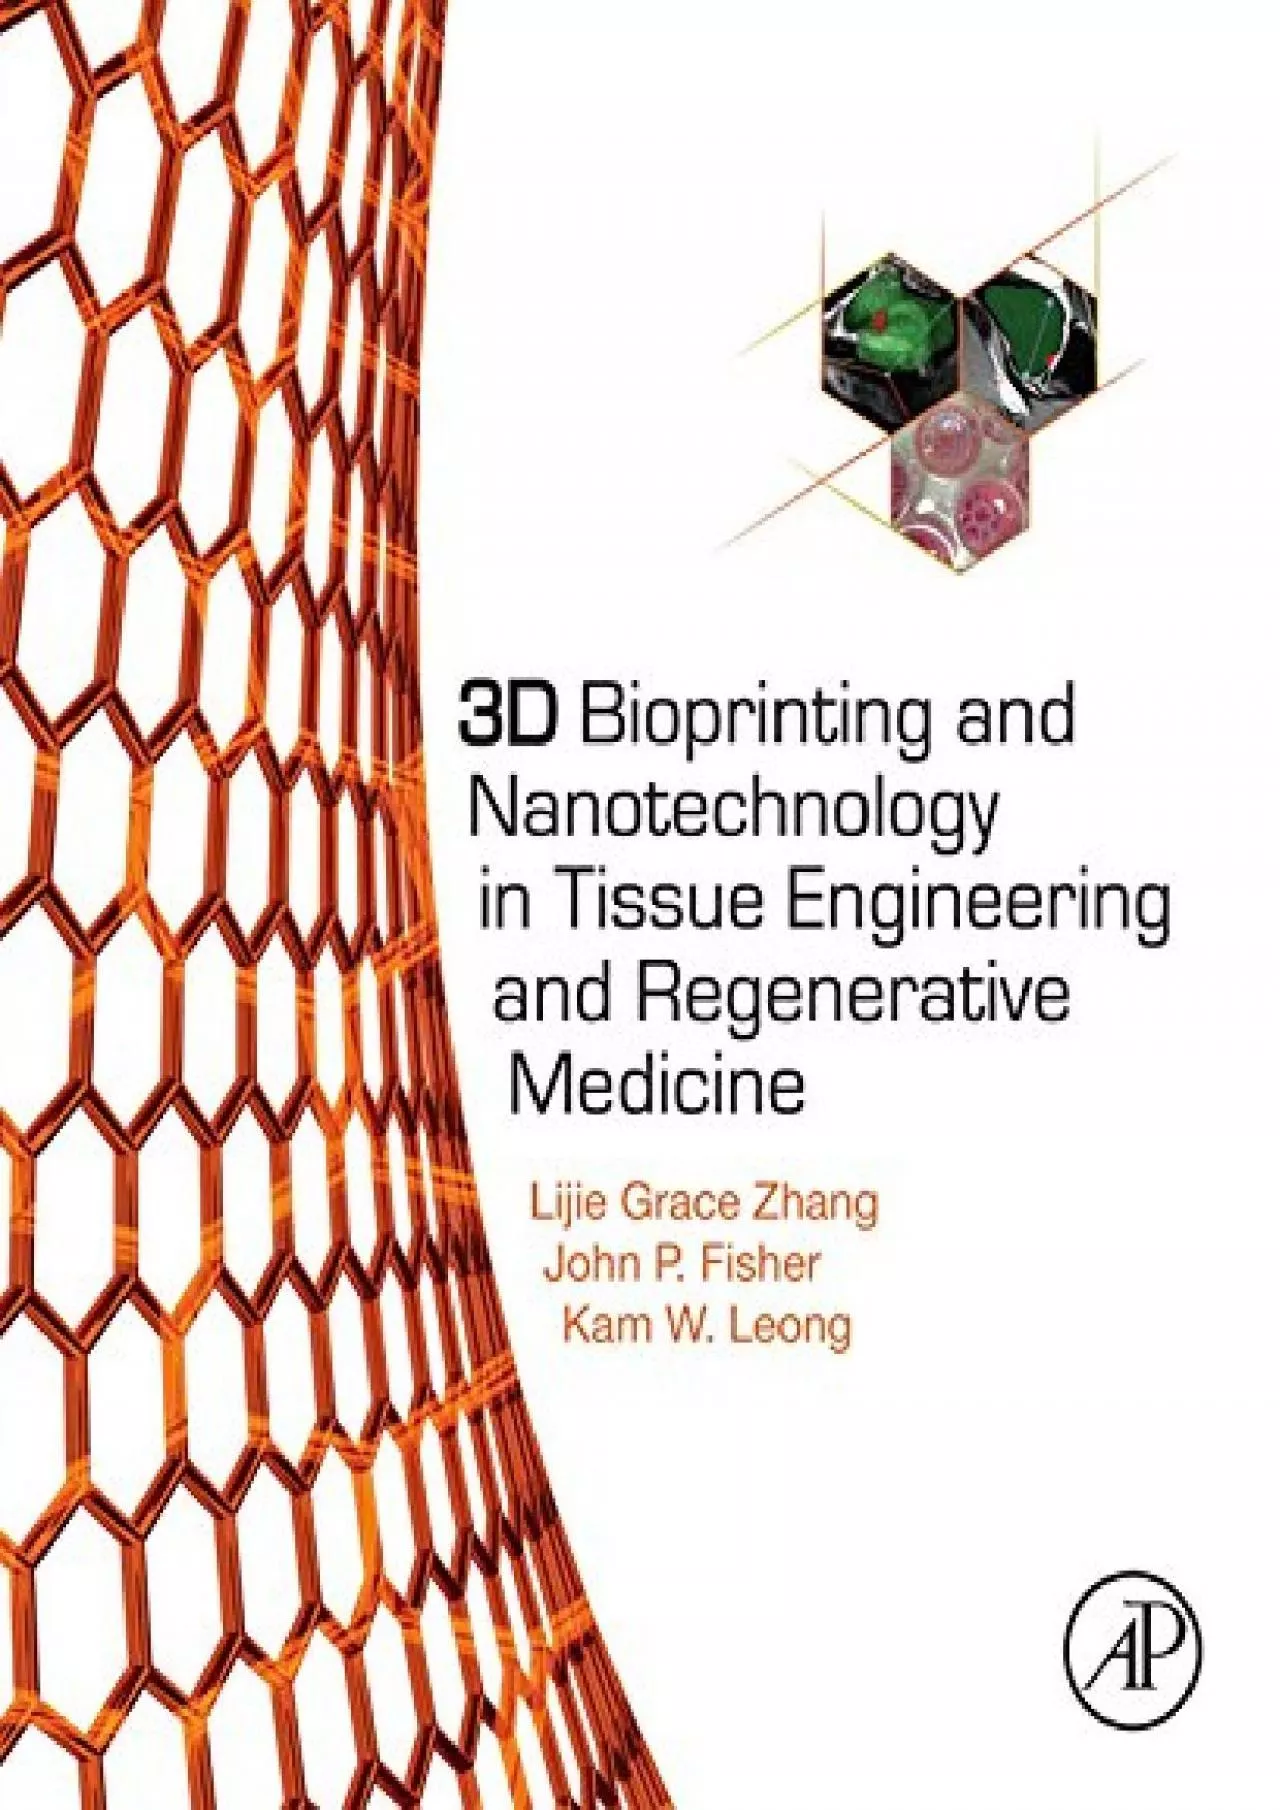 (DOWNLOAD)-3D Bioprinting and Nanotechnology in Tissue Engineering and Regenerative Medicine